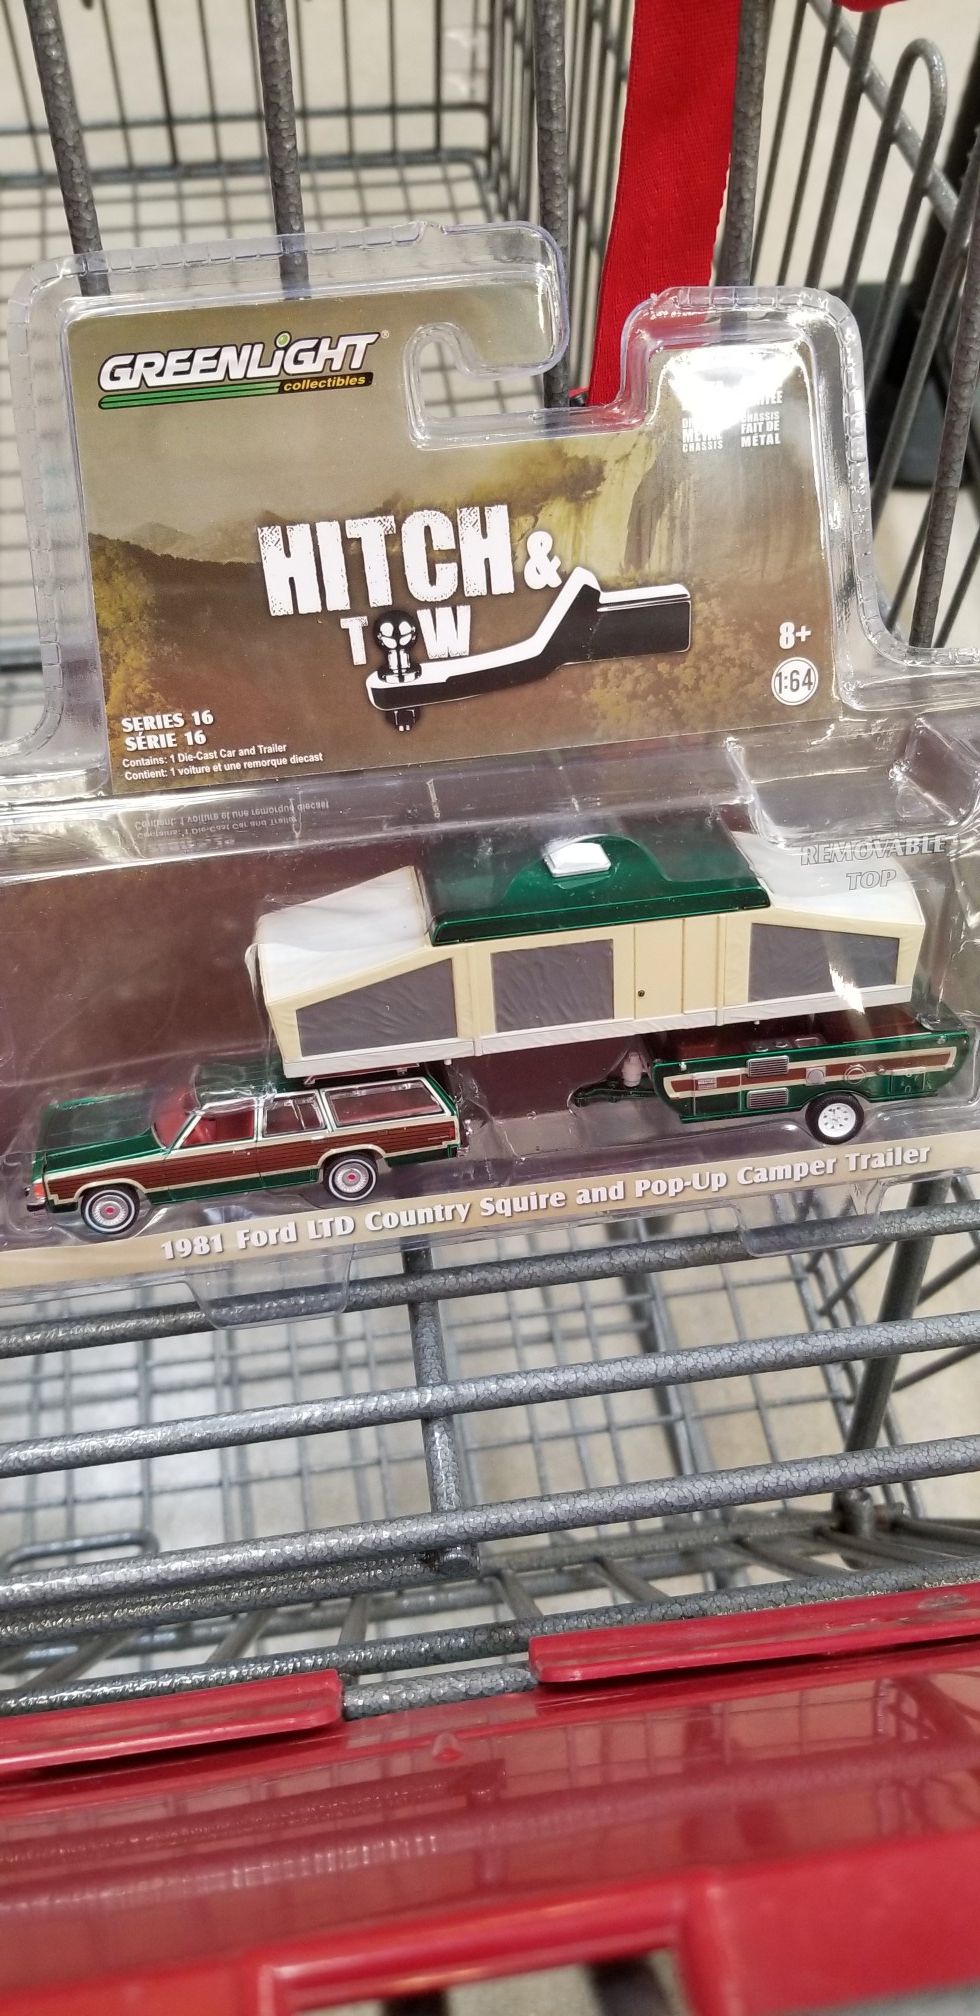 Greenlight 1981 Ford LTD camper with trailer